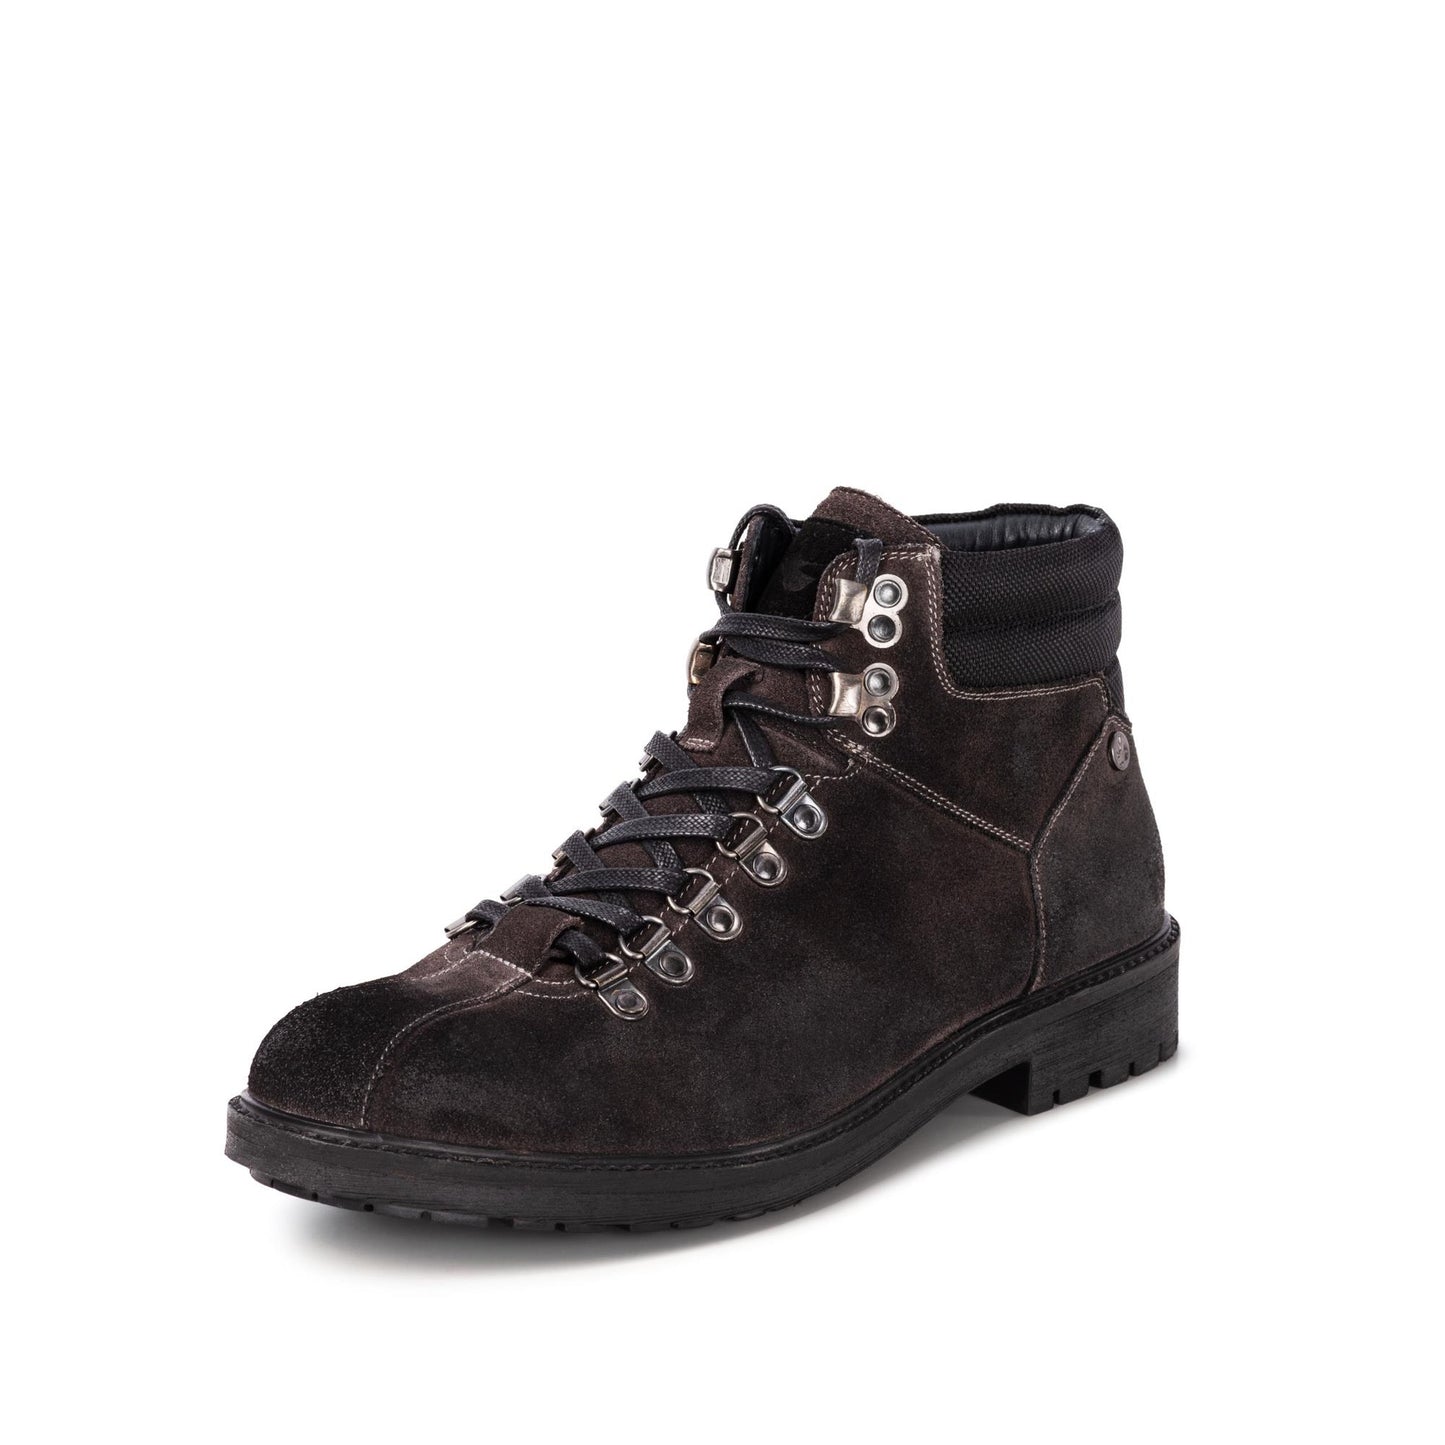 MENS CRAG CHARCOAL SUEDE HIKING BOOT